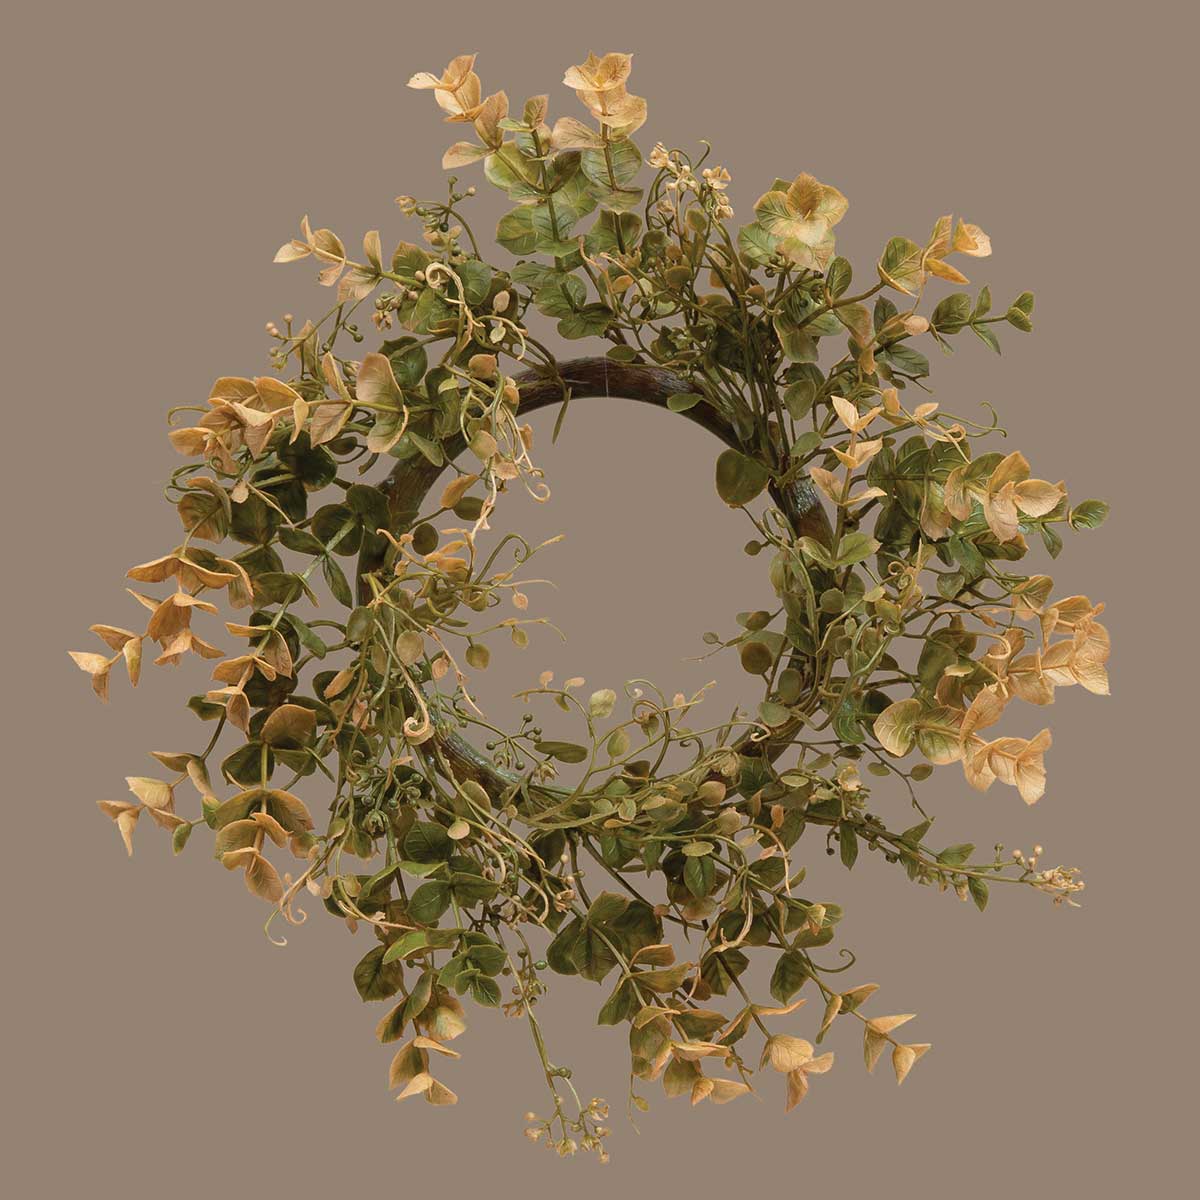 CANDLE RING AUTUMN PRIVET 10IN (INNER RING 4.5IN)